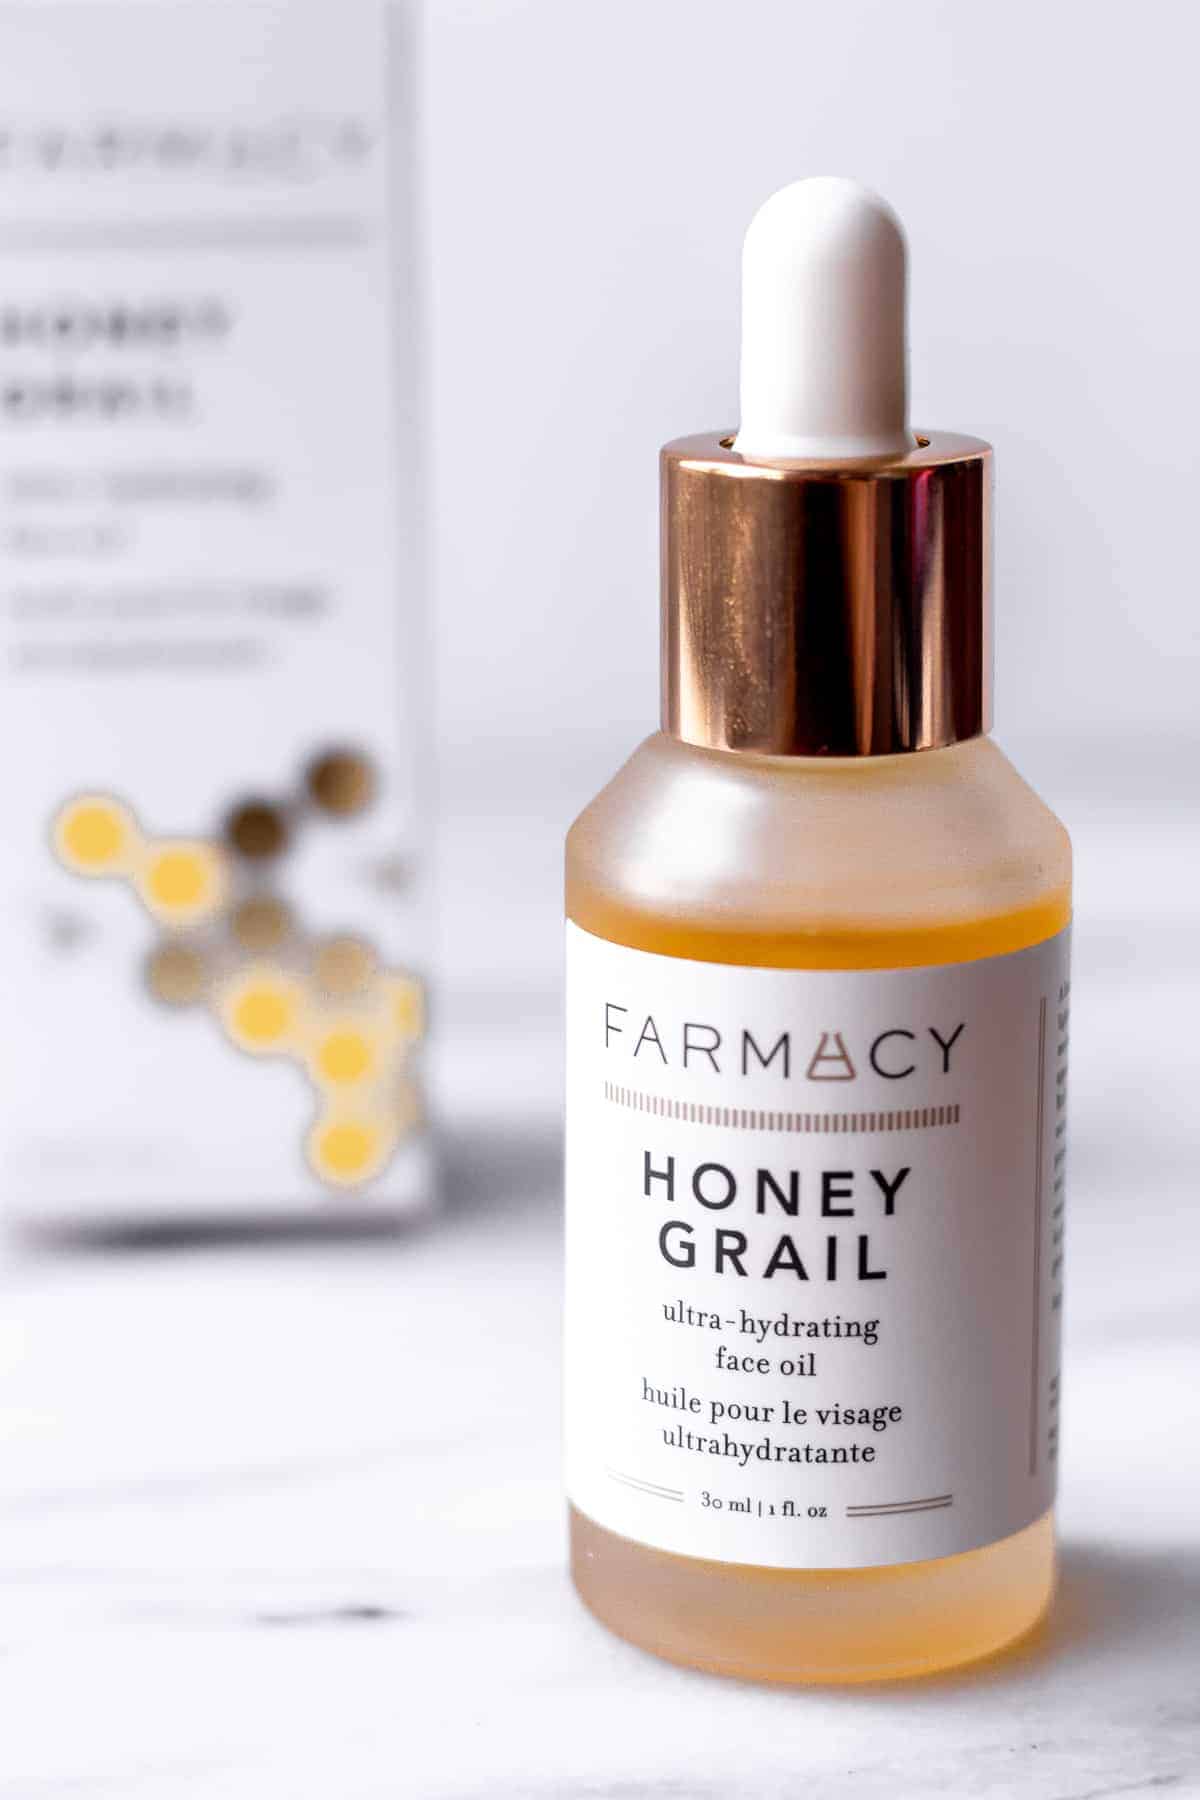 Farmacy Honey Grail Ultra-Hydrating Face Oil bottle and box on a marble background